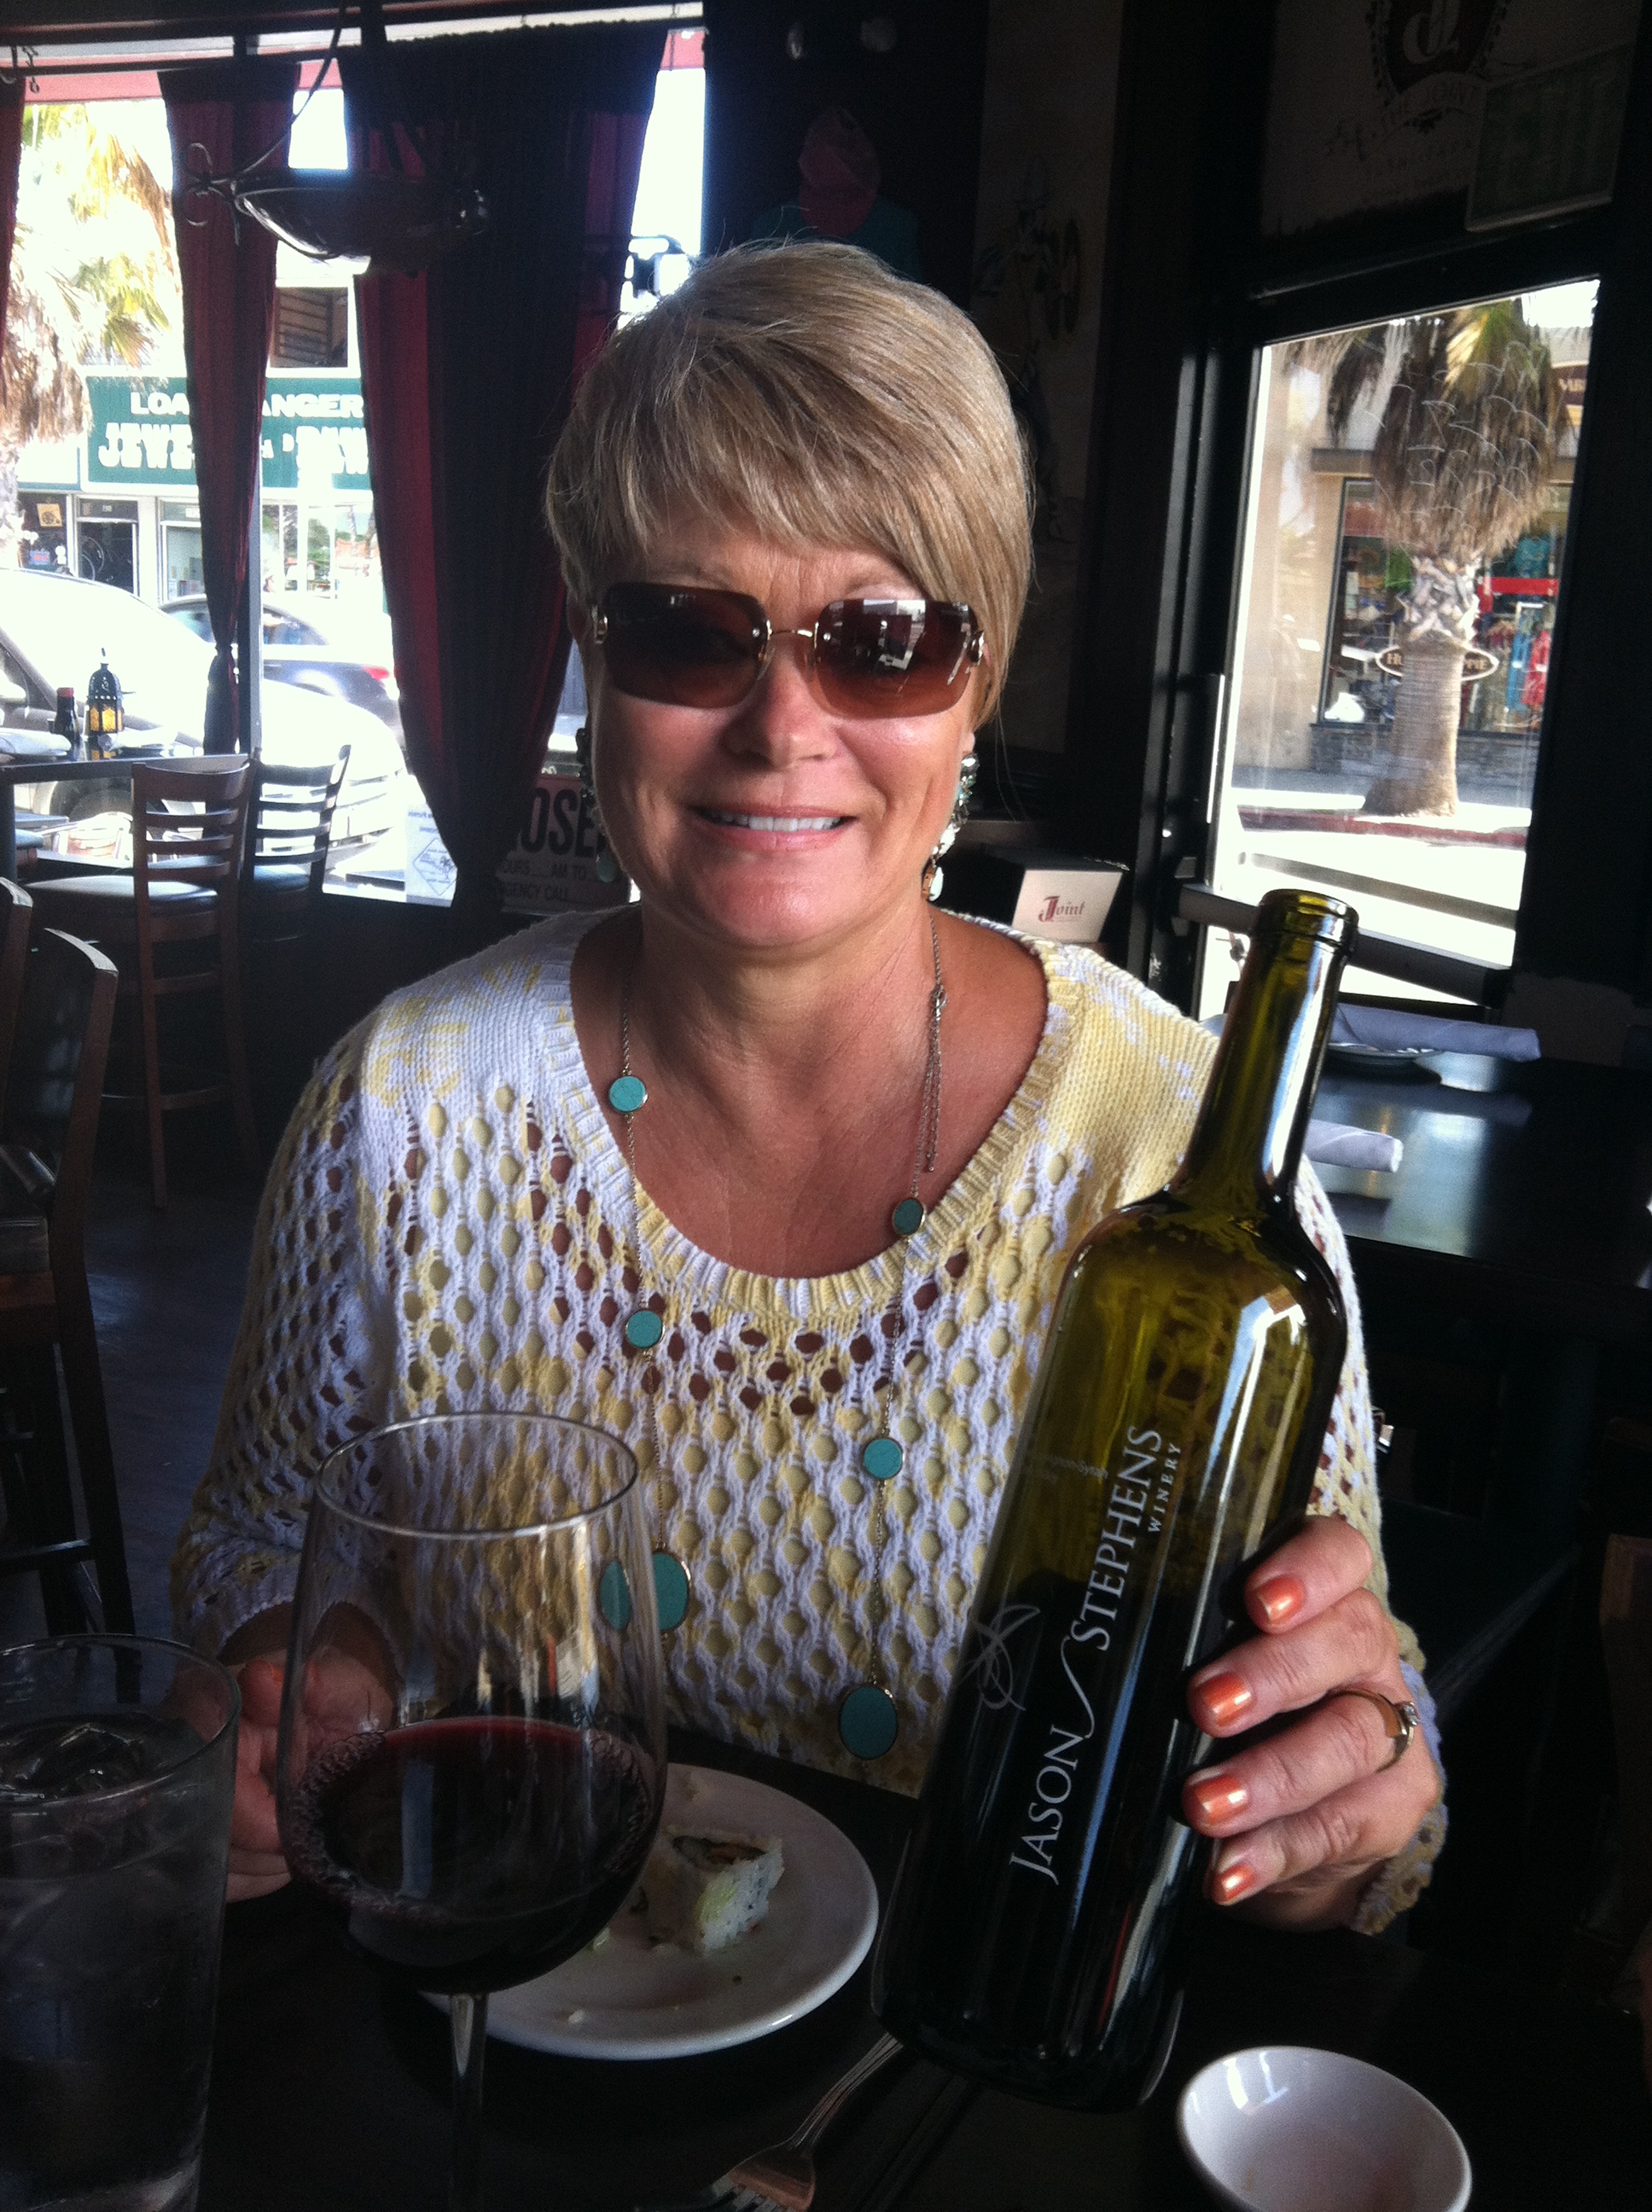 Two angelic sights: our hostess and her wine recommendation.